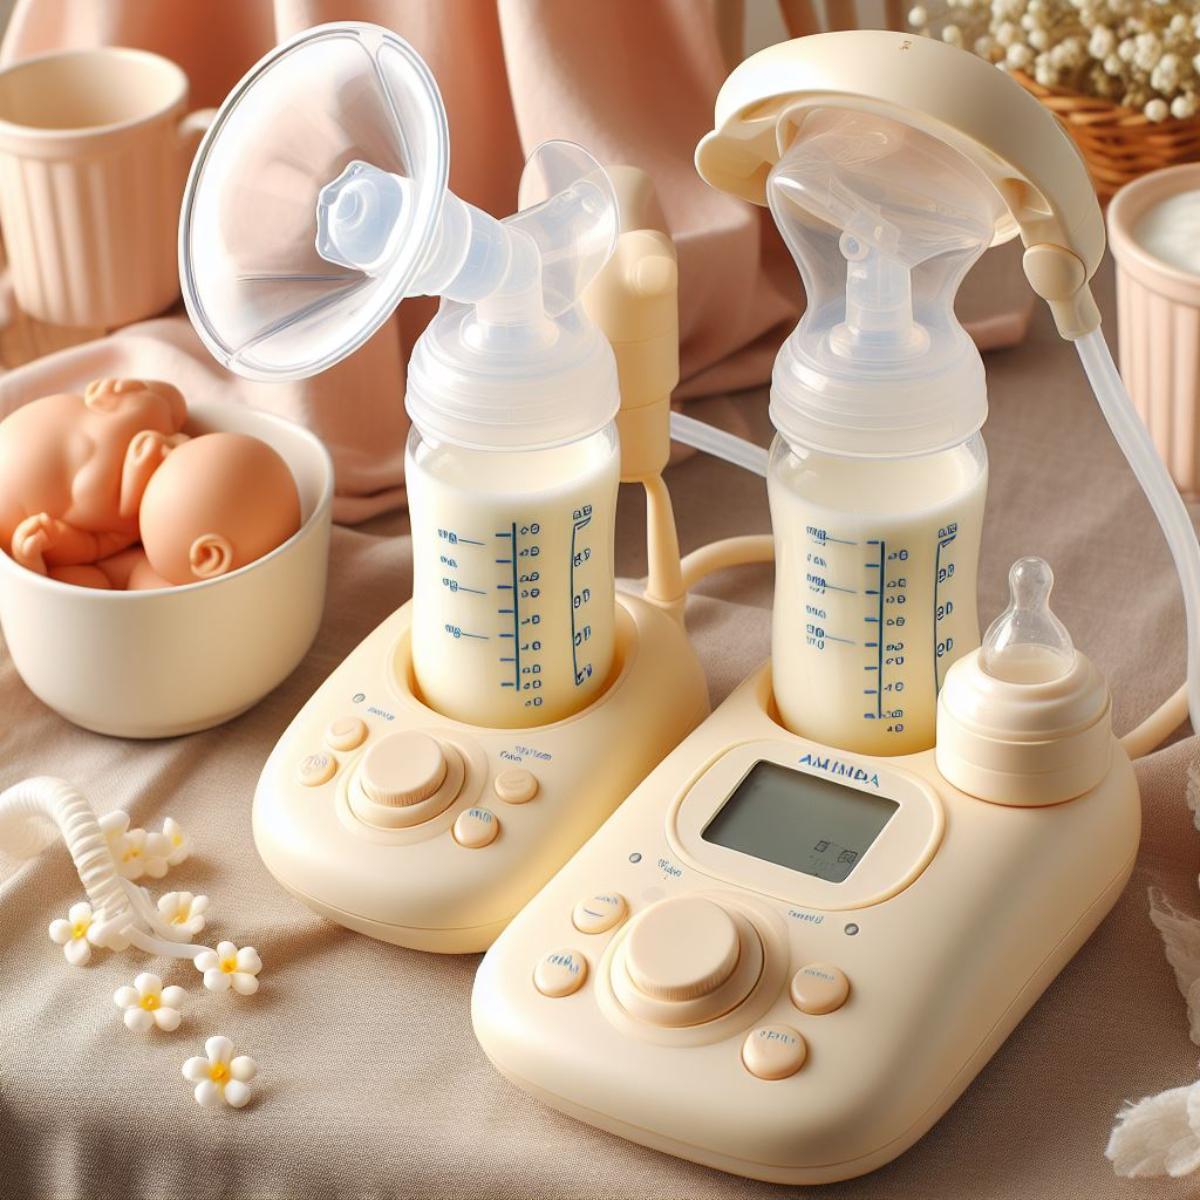 Do you need a breast pump in the UK?